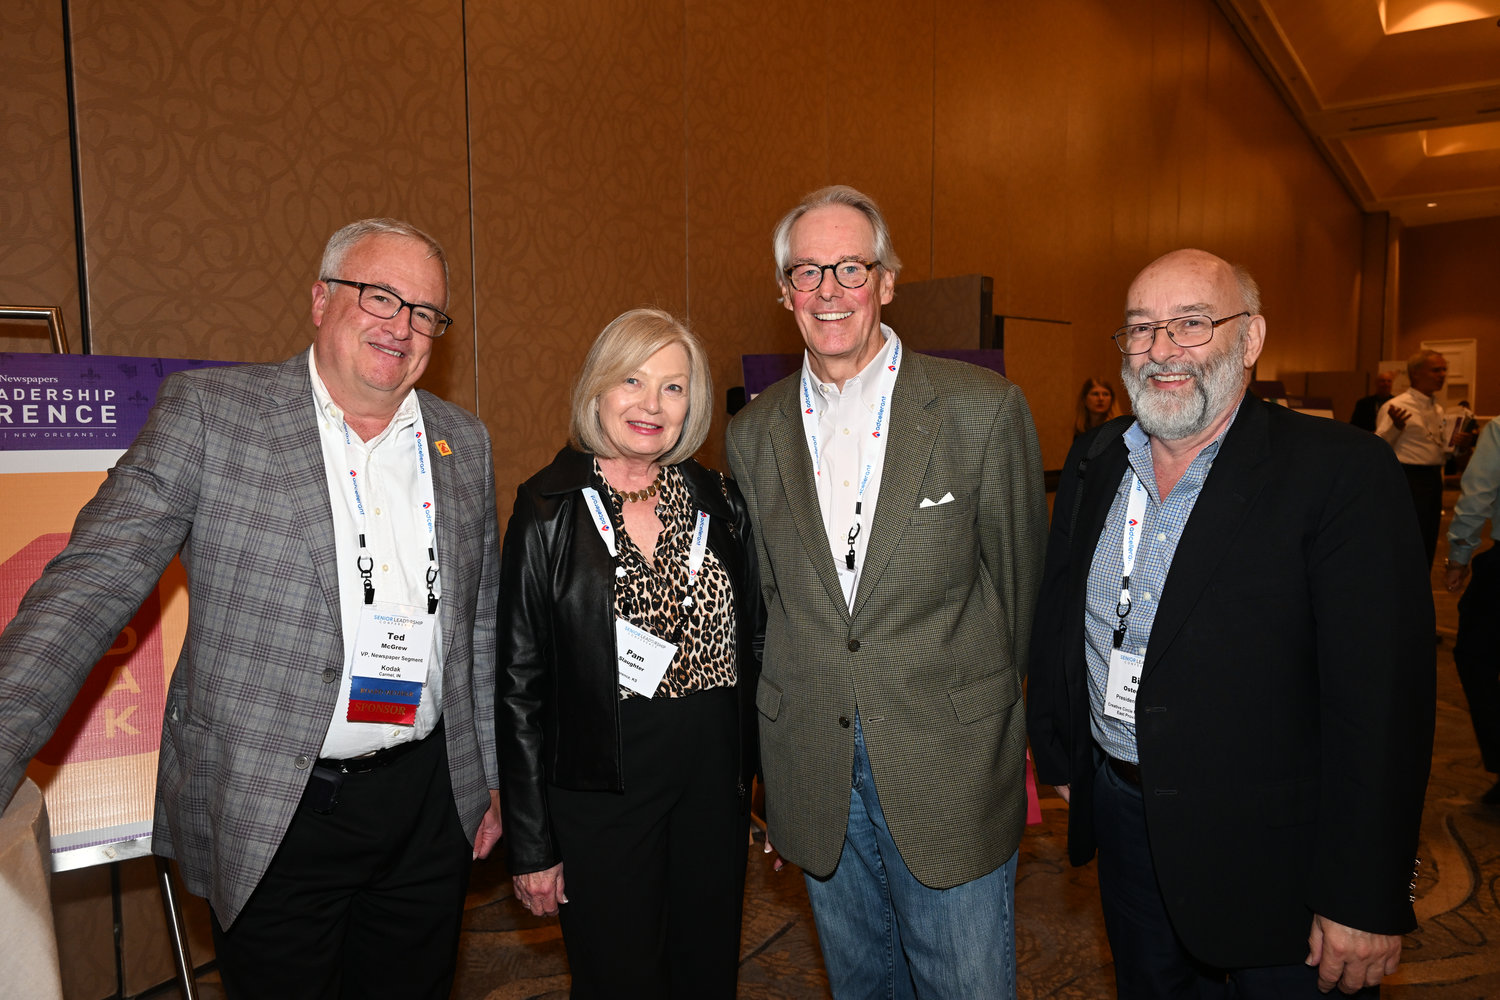 Ted McGrew, VP, Newspaper Segment, Kodak; Pam Slaugher; Tom Slaughter, executive director, Inland Press Foundation; and Bill Ostendorf, president and founder, Creative Circle Media Solutions. (Photo by Jeff Strout)